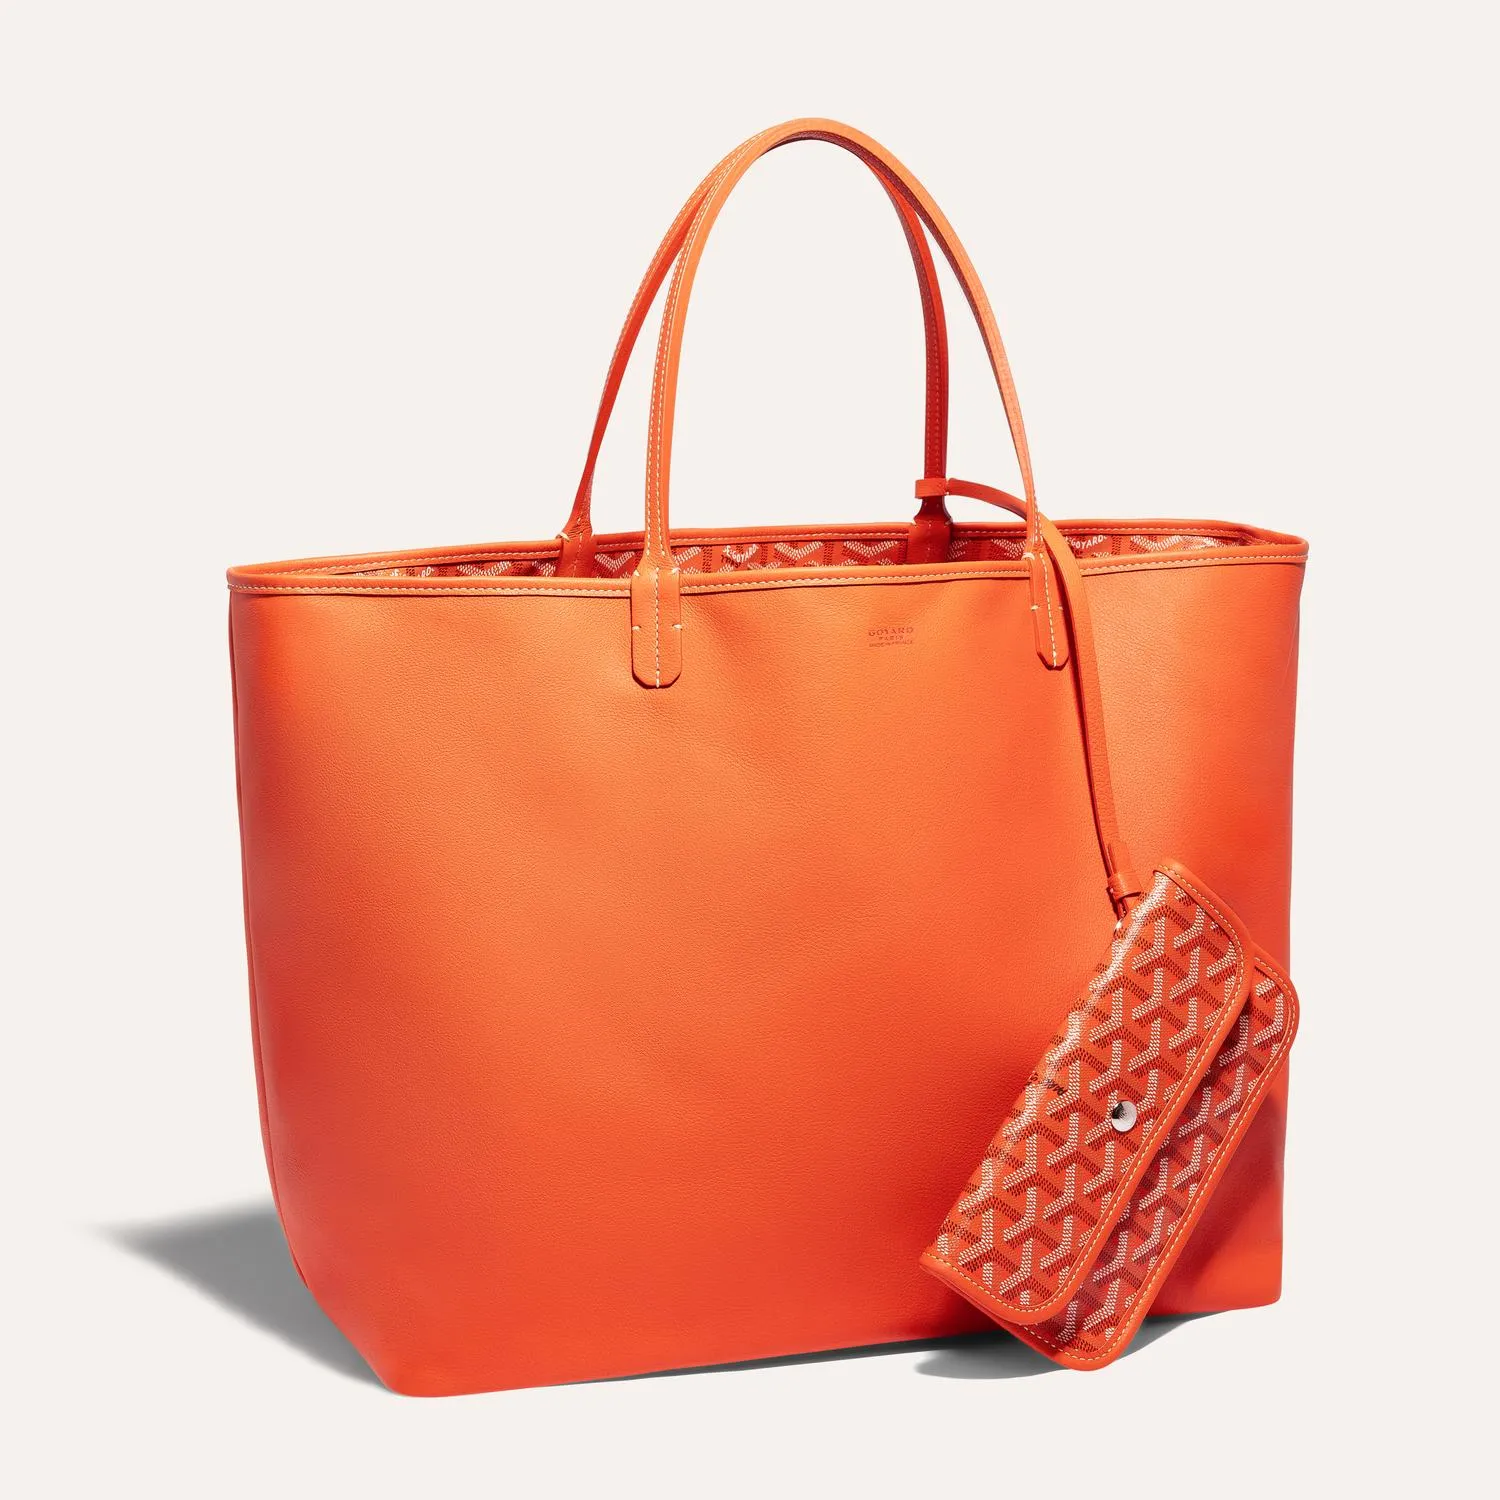 Maison Goyard - VIRTUOSO EMBROIDERIES Contrast and